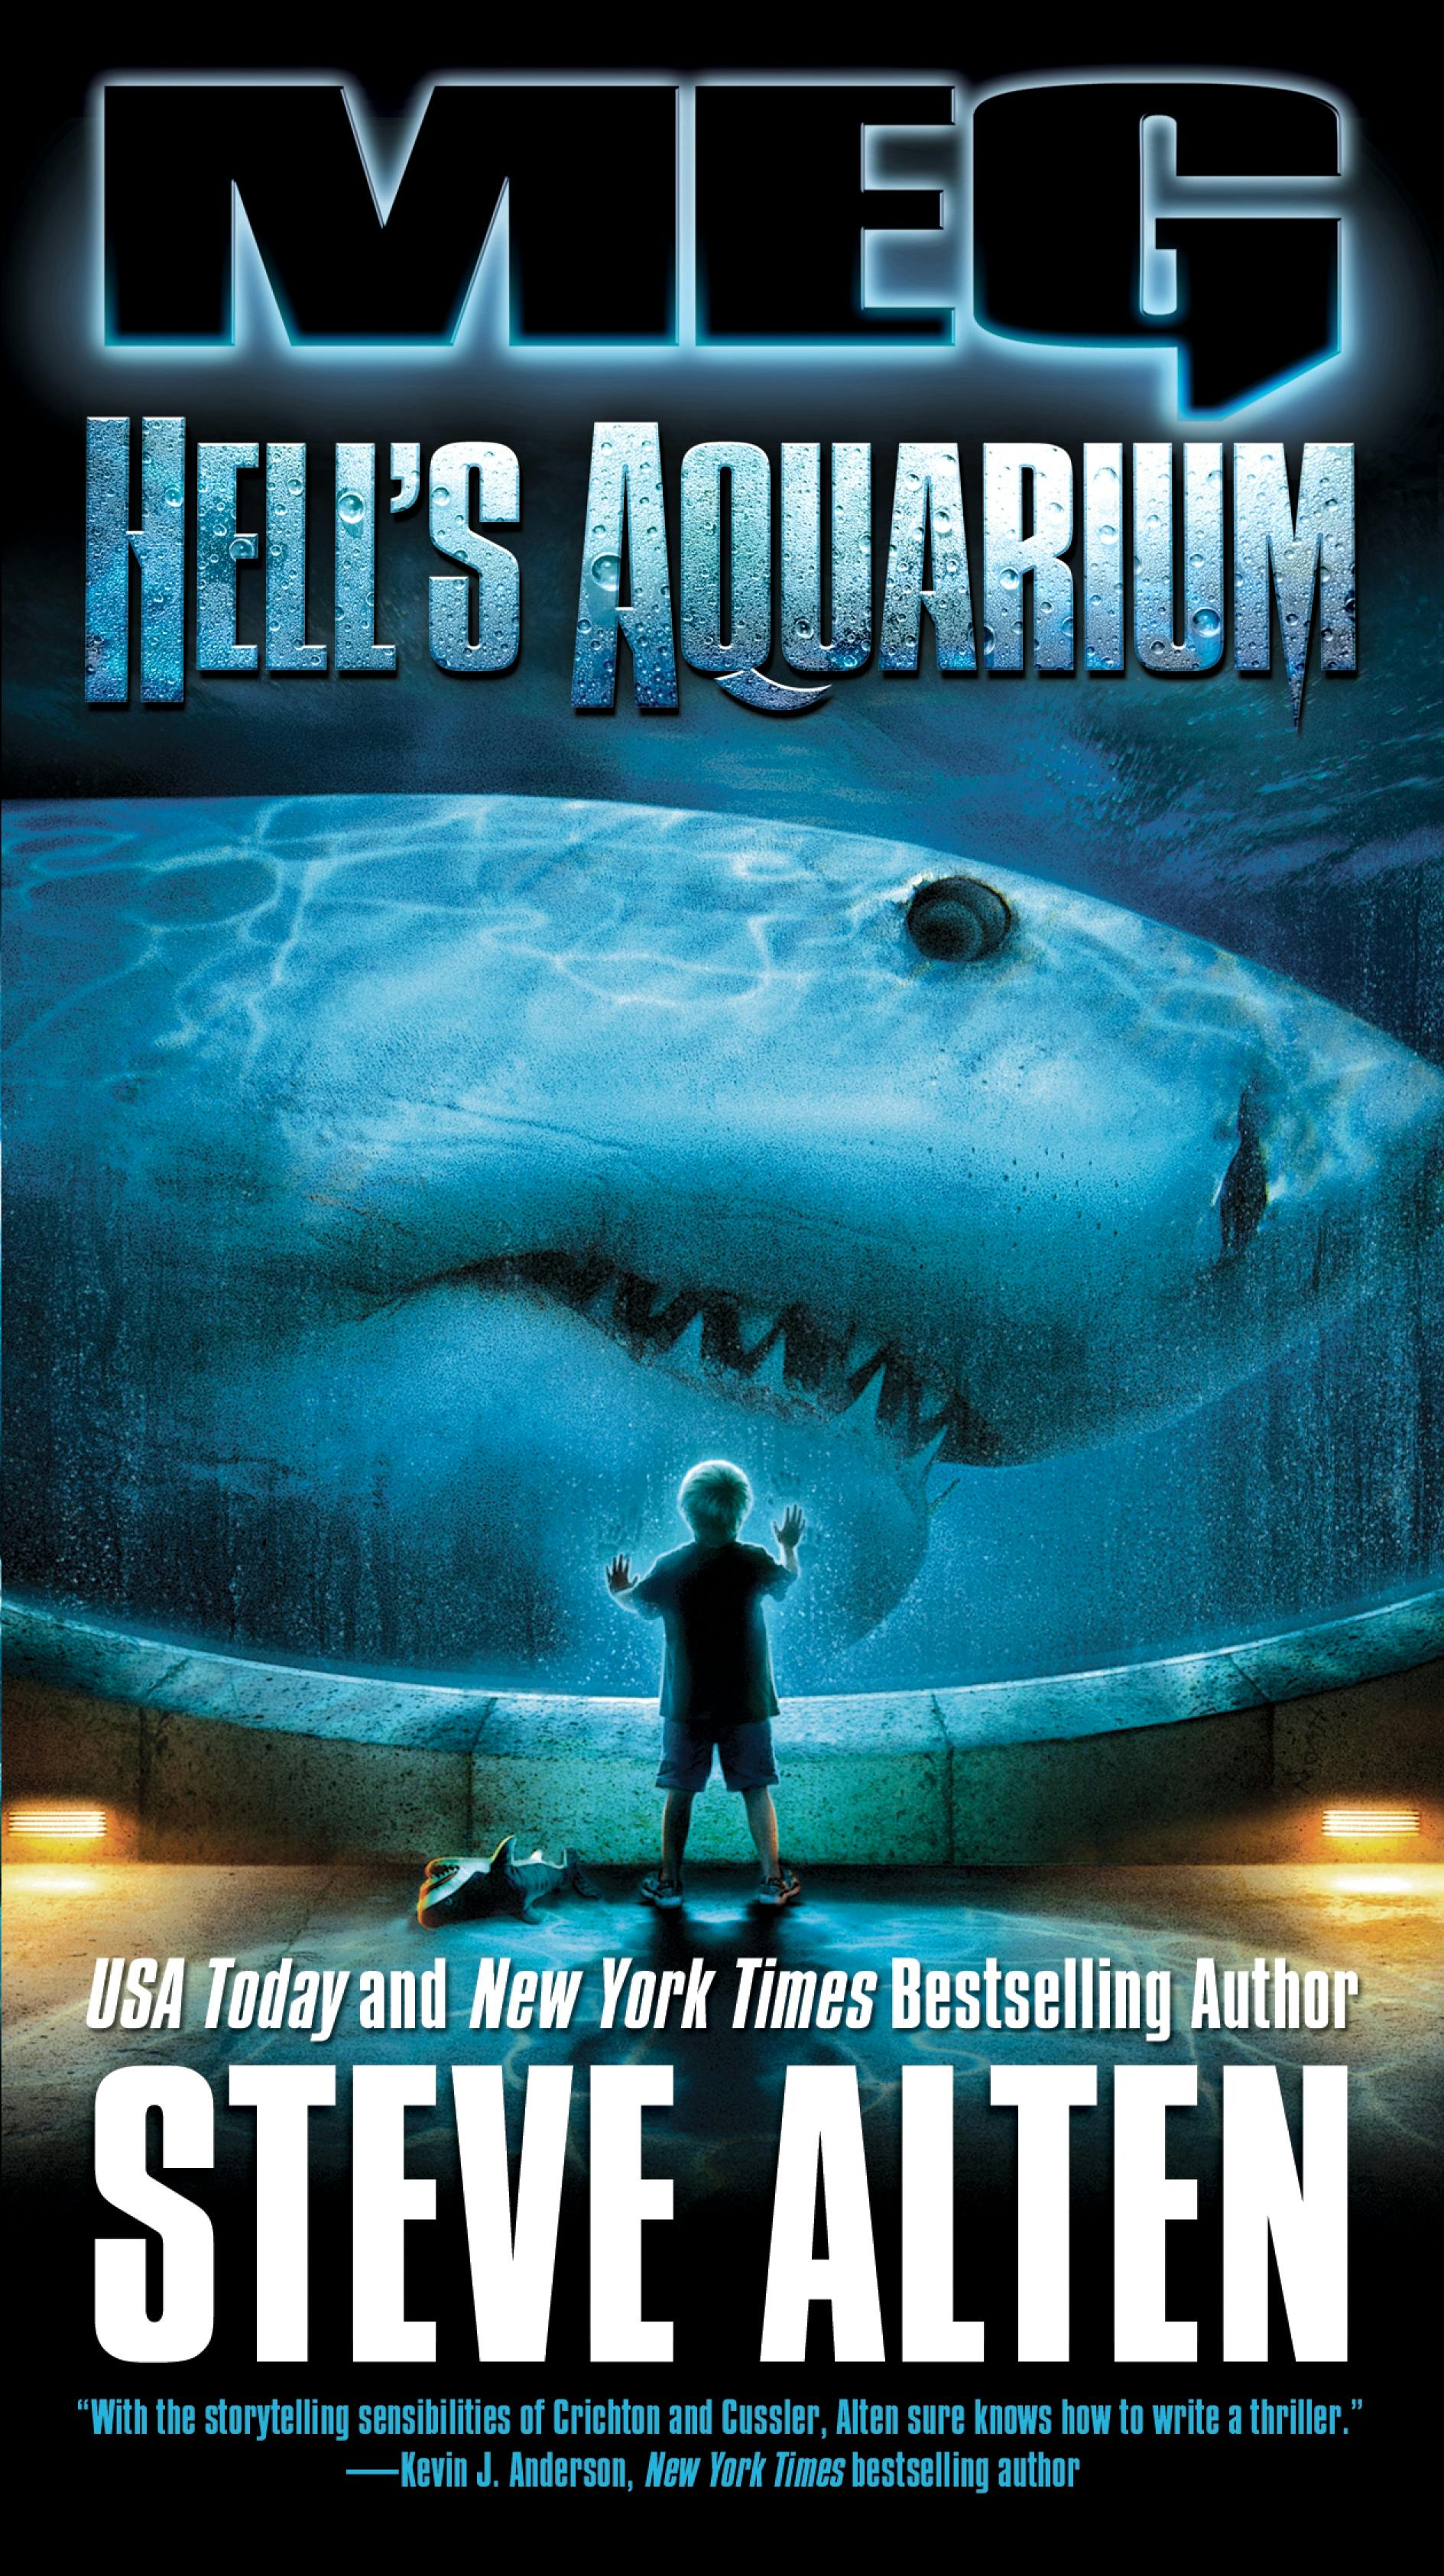 Cover for the book titled as: MEG: Hell's Aquarium